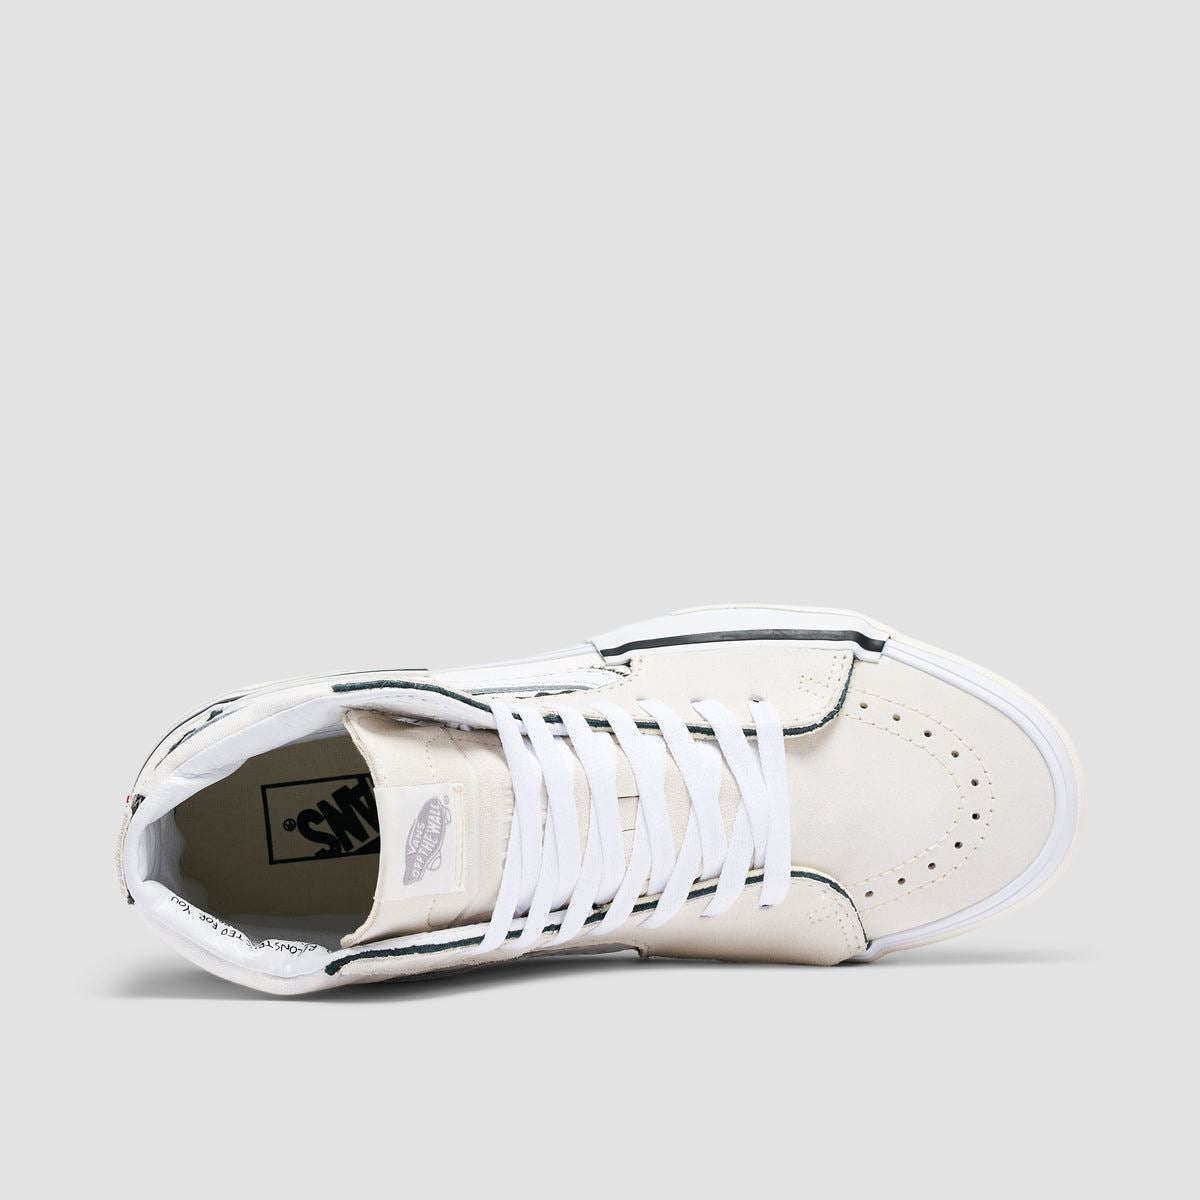 Vans Sk8-Hi Reconstruct High Top Shoes - Marshmallow/White